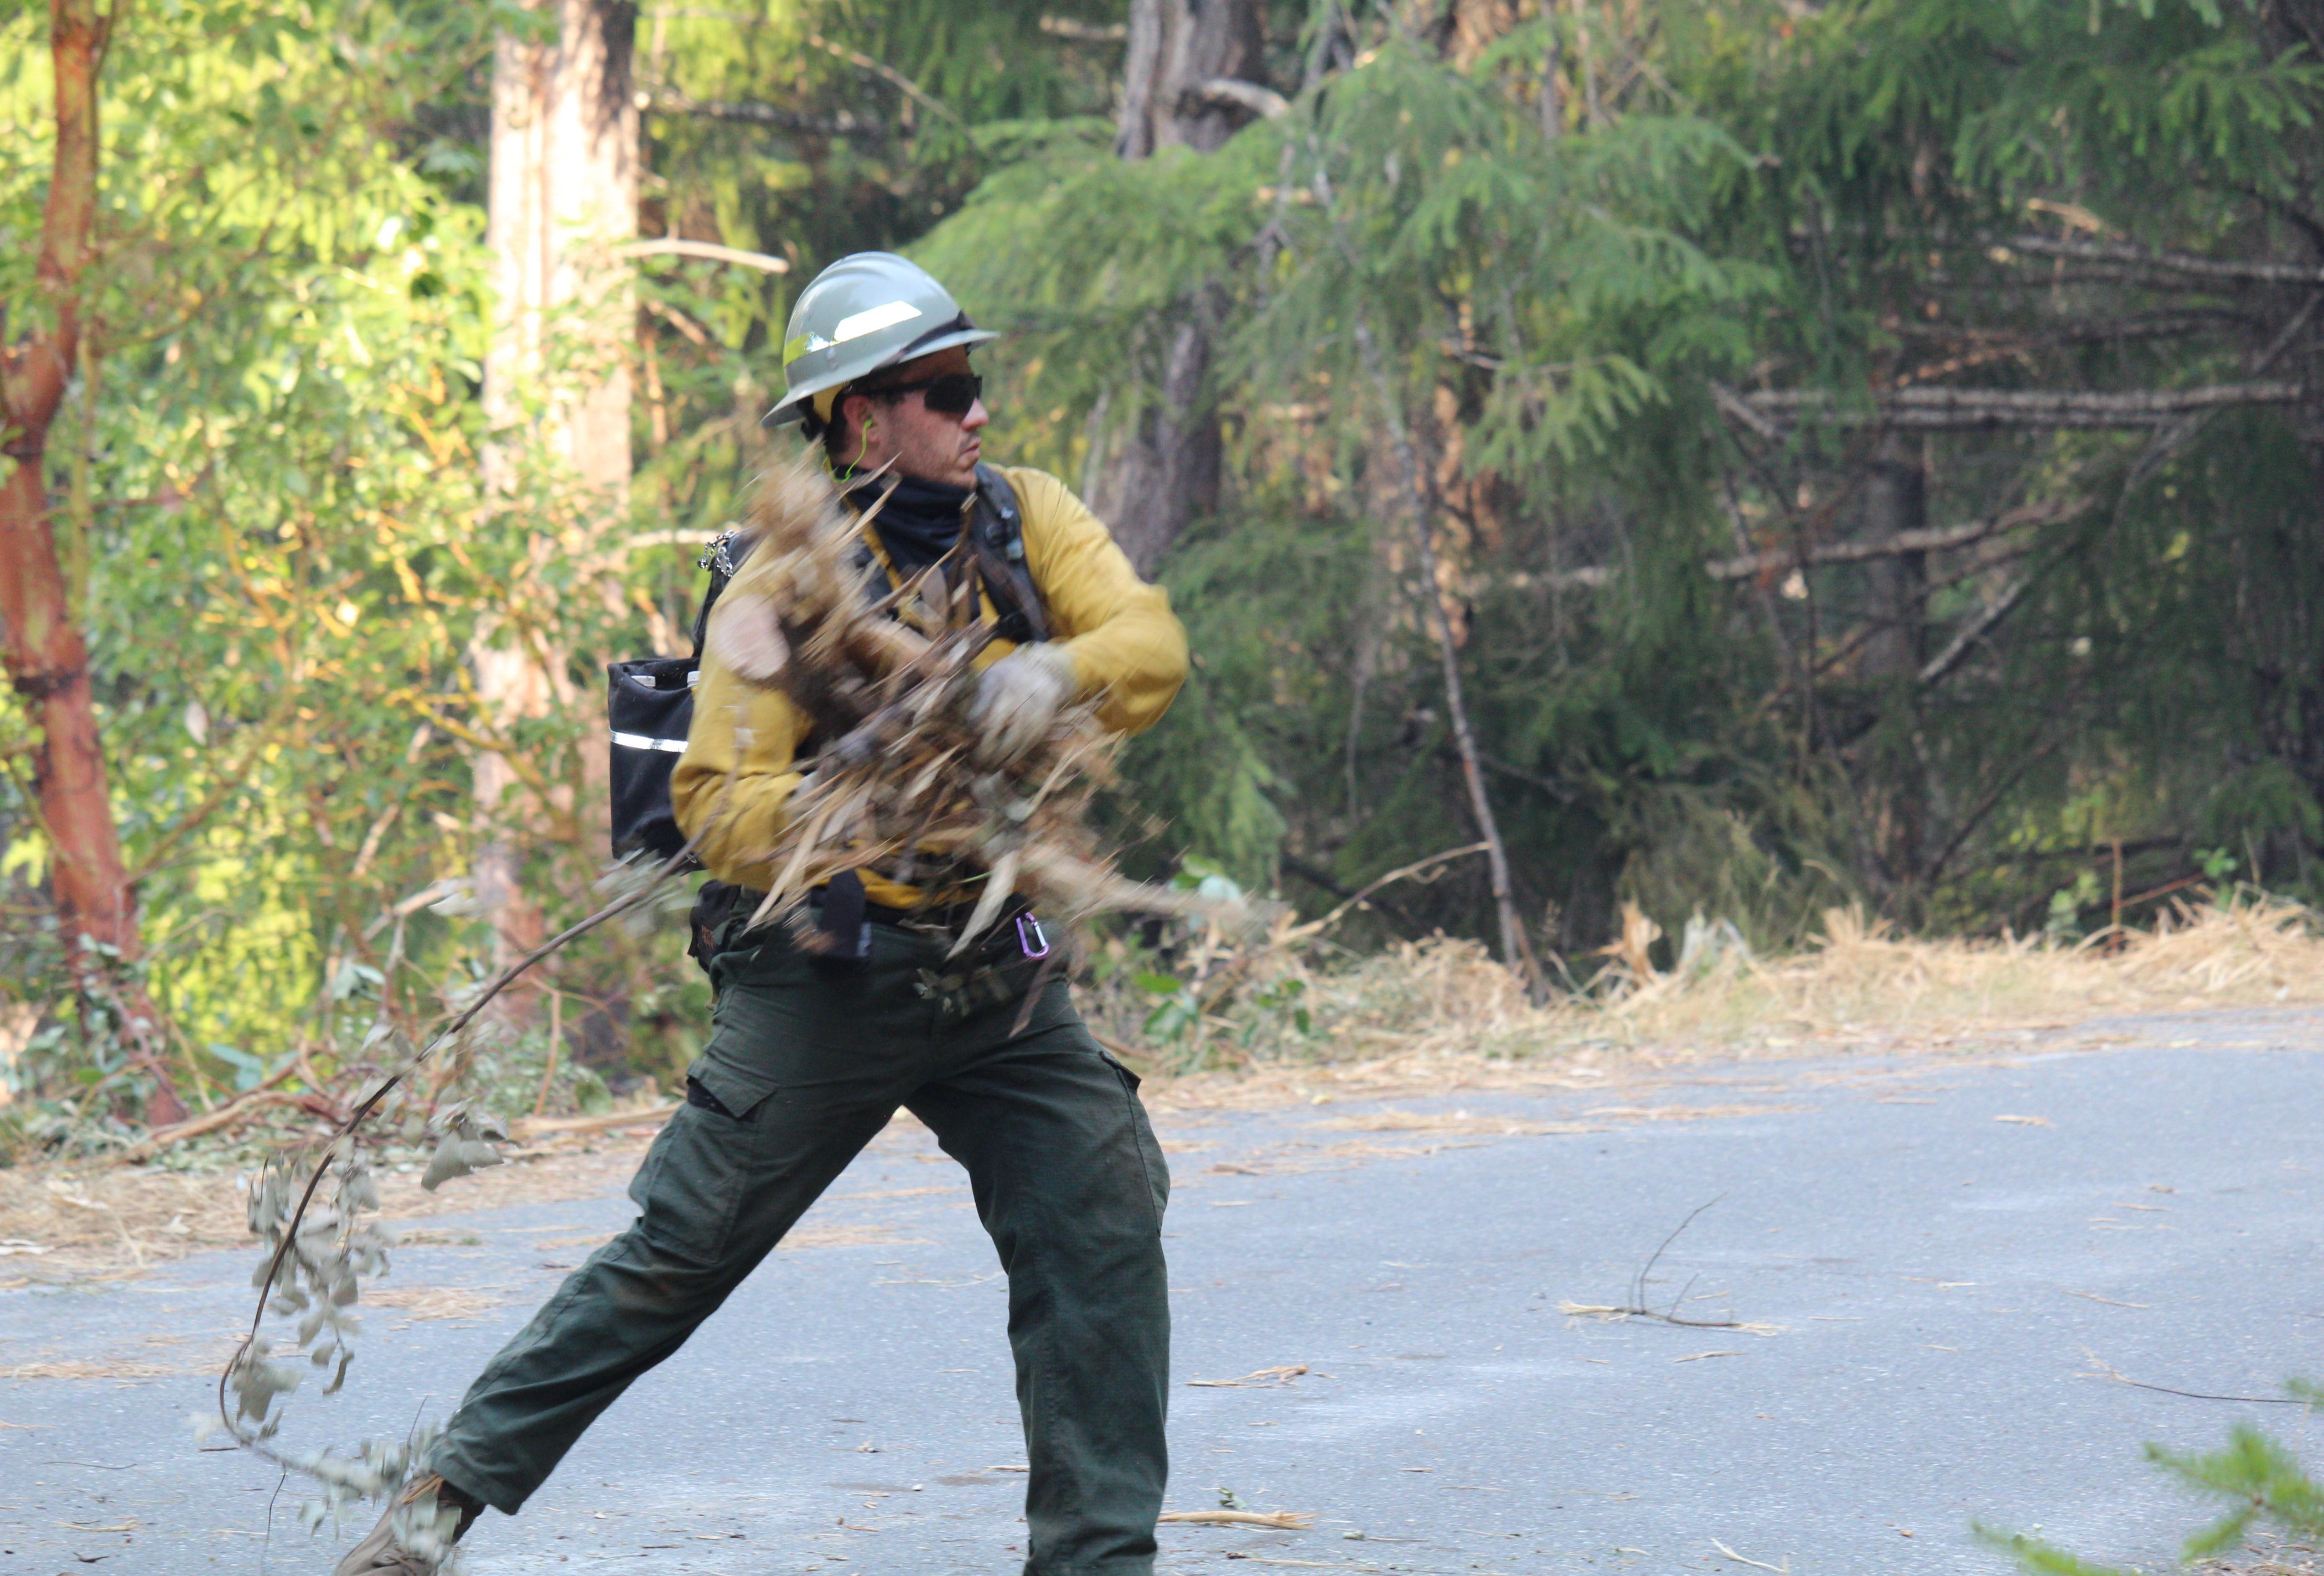 A firefighter wearing a grey helmet and black backpack throws a bundle of sticks and brush